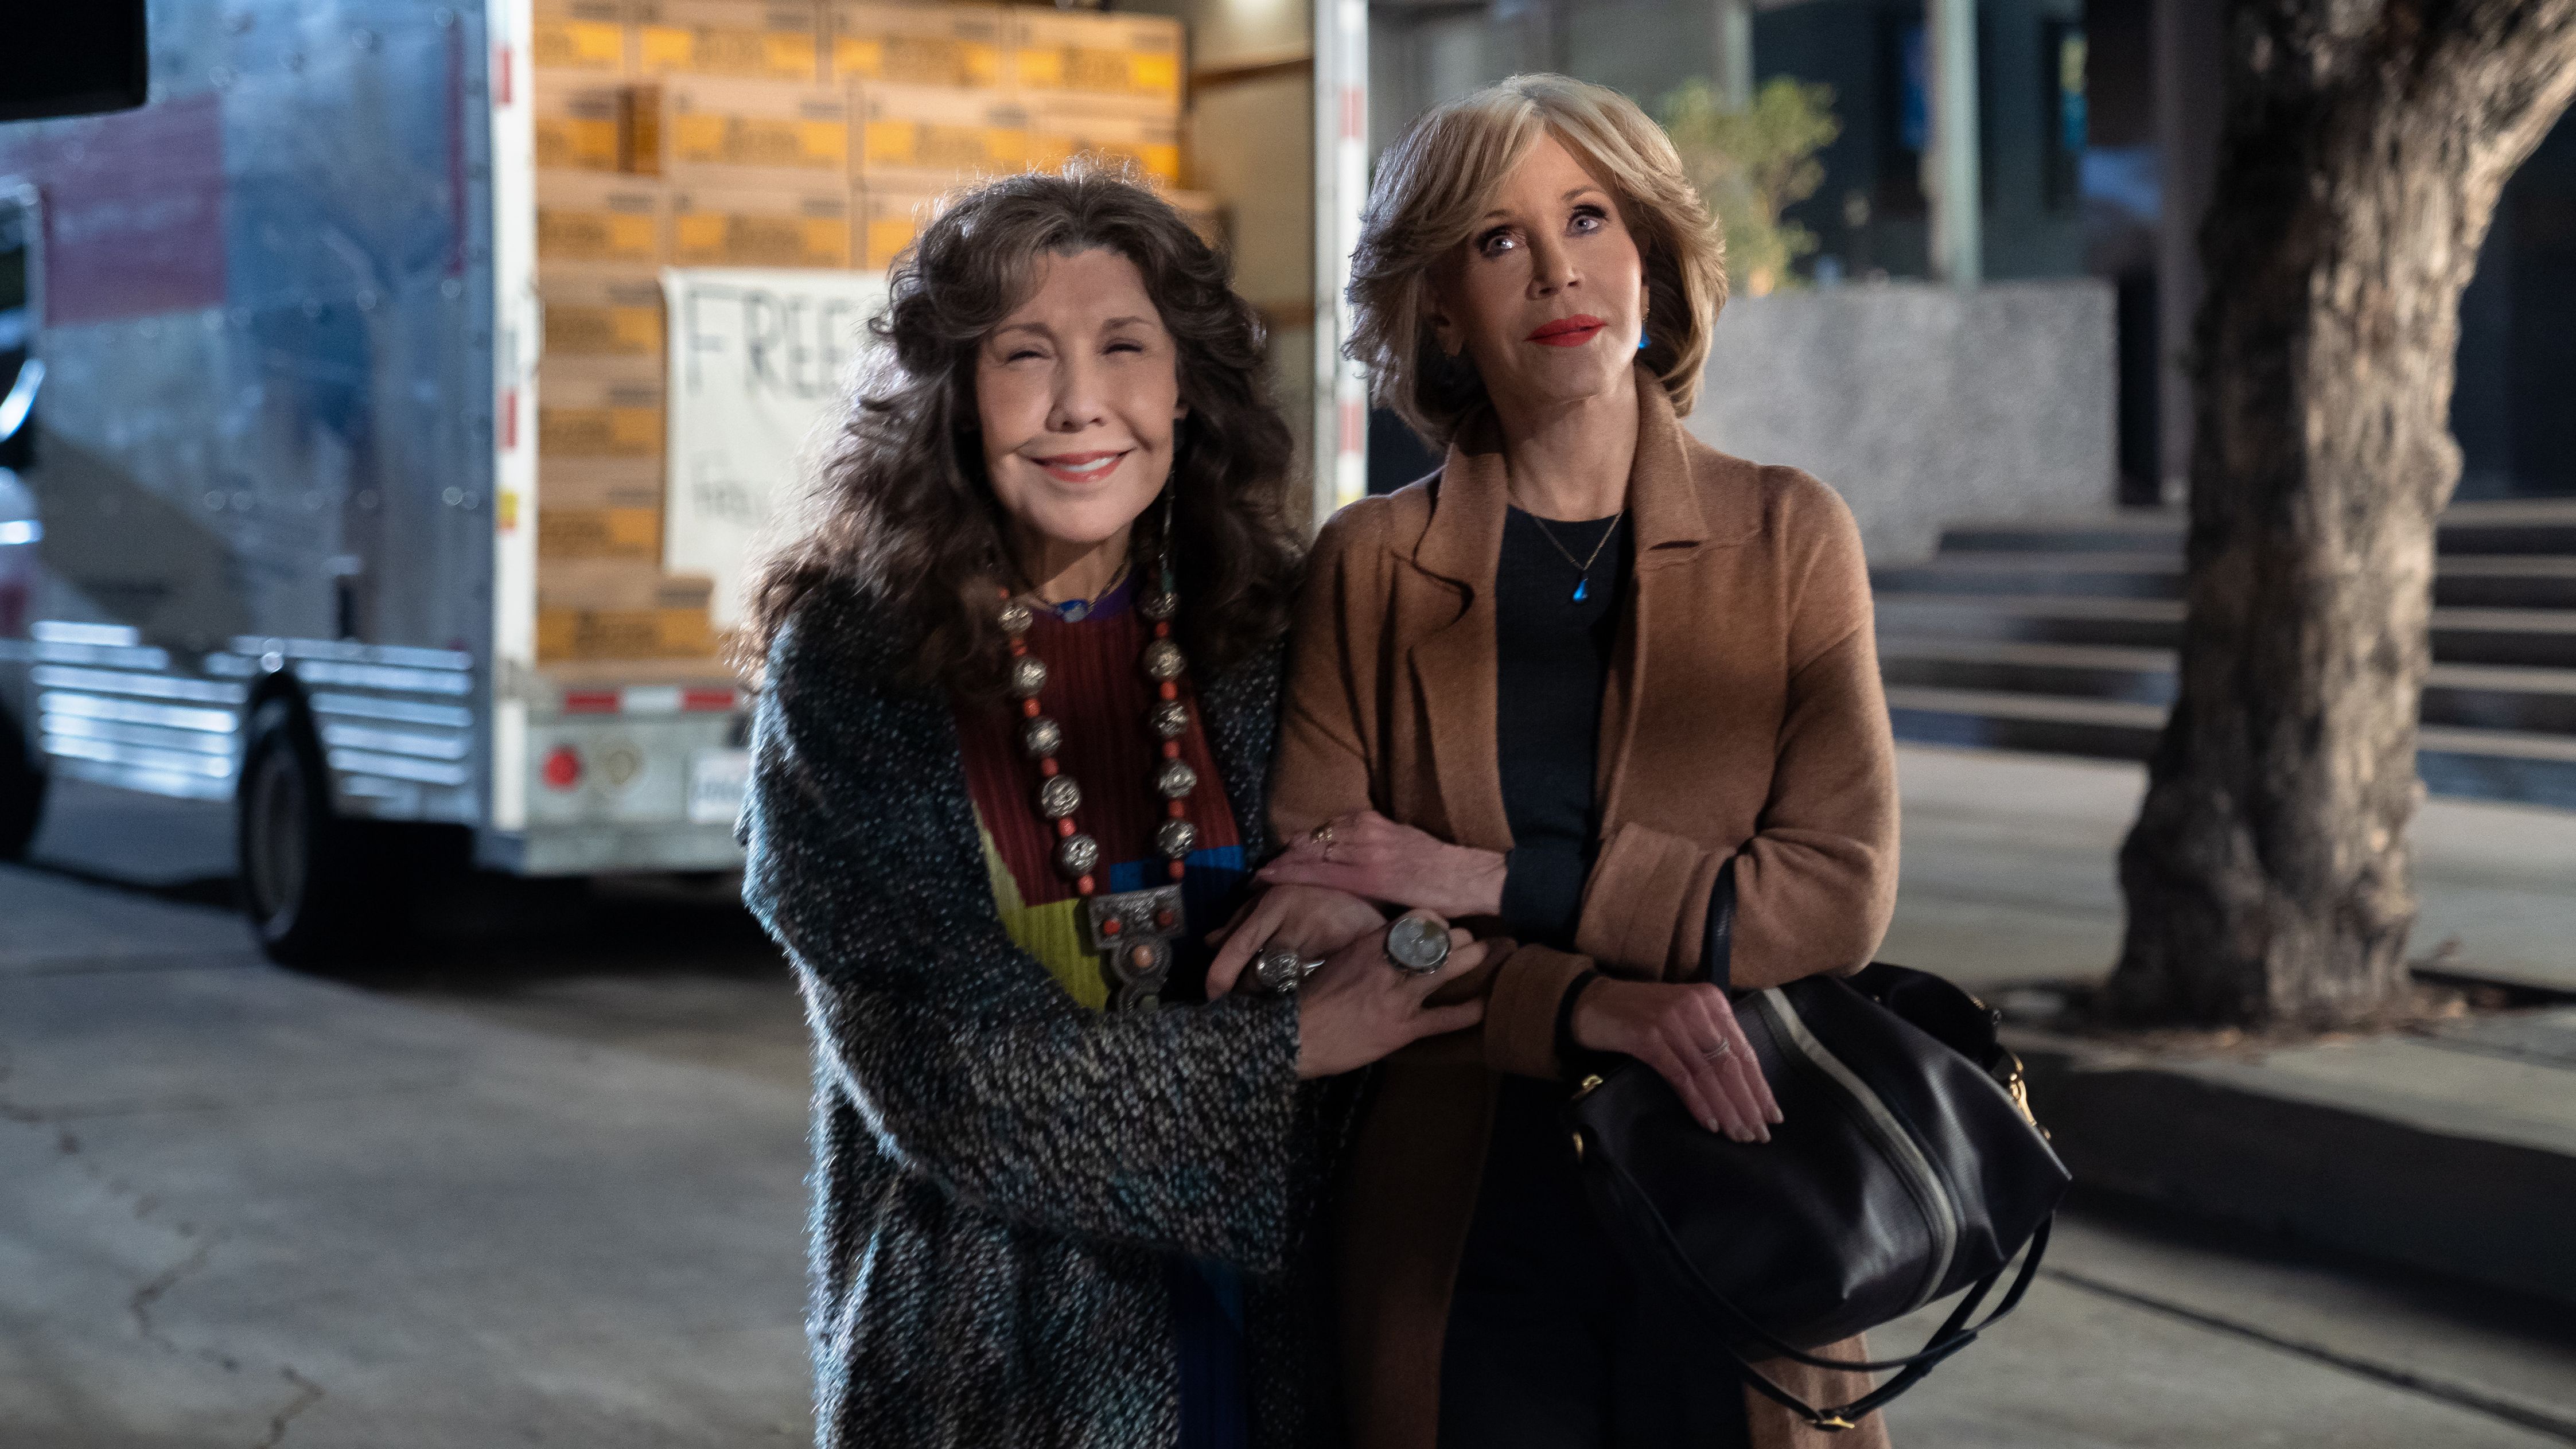 (From left) Lily Tomlin stars as Frankie Bergstein and Jane Fonda as Grace Hanson in "Grace and Frankie." 